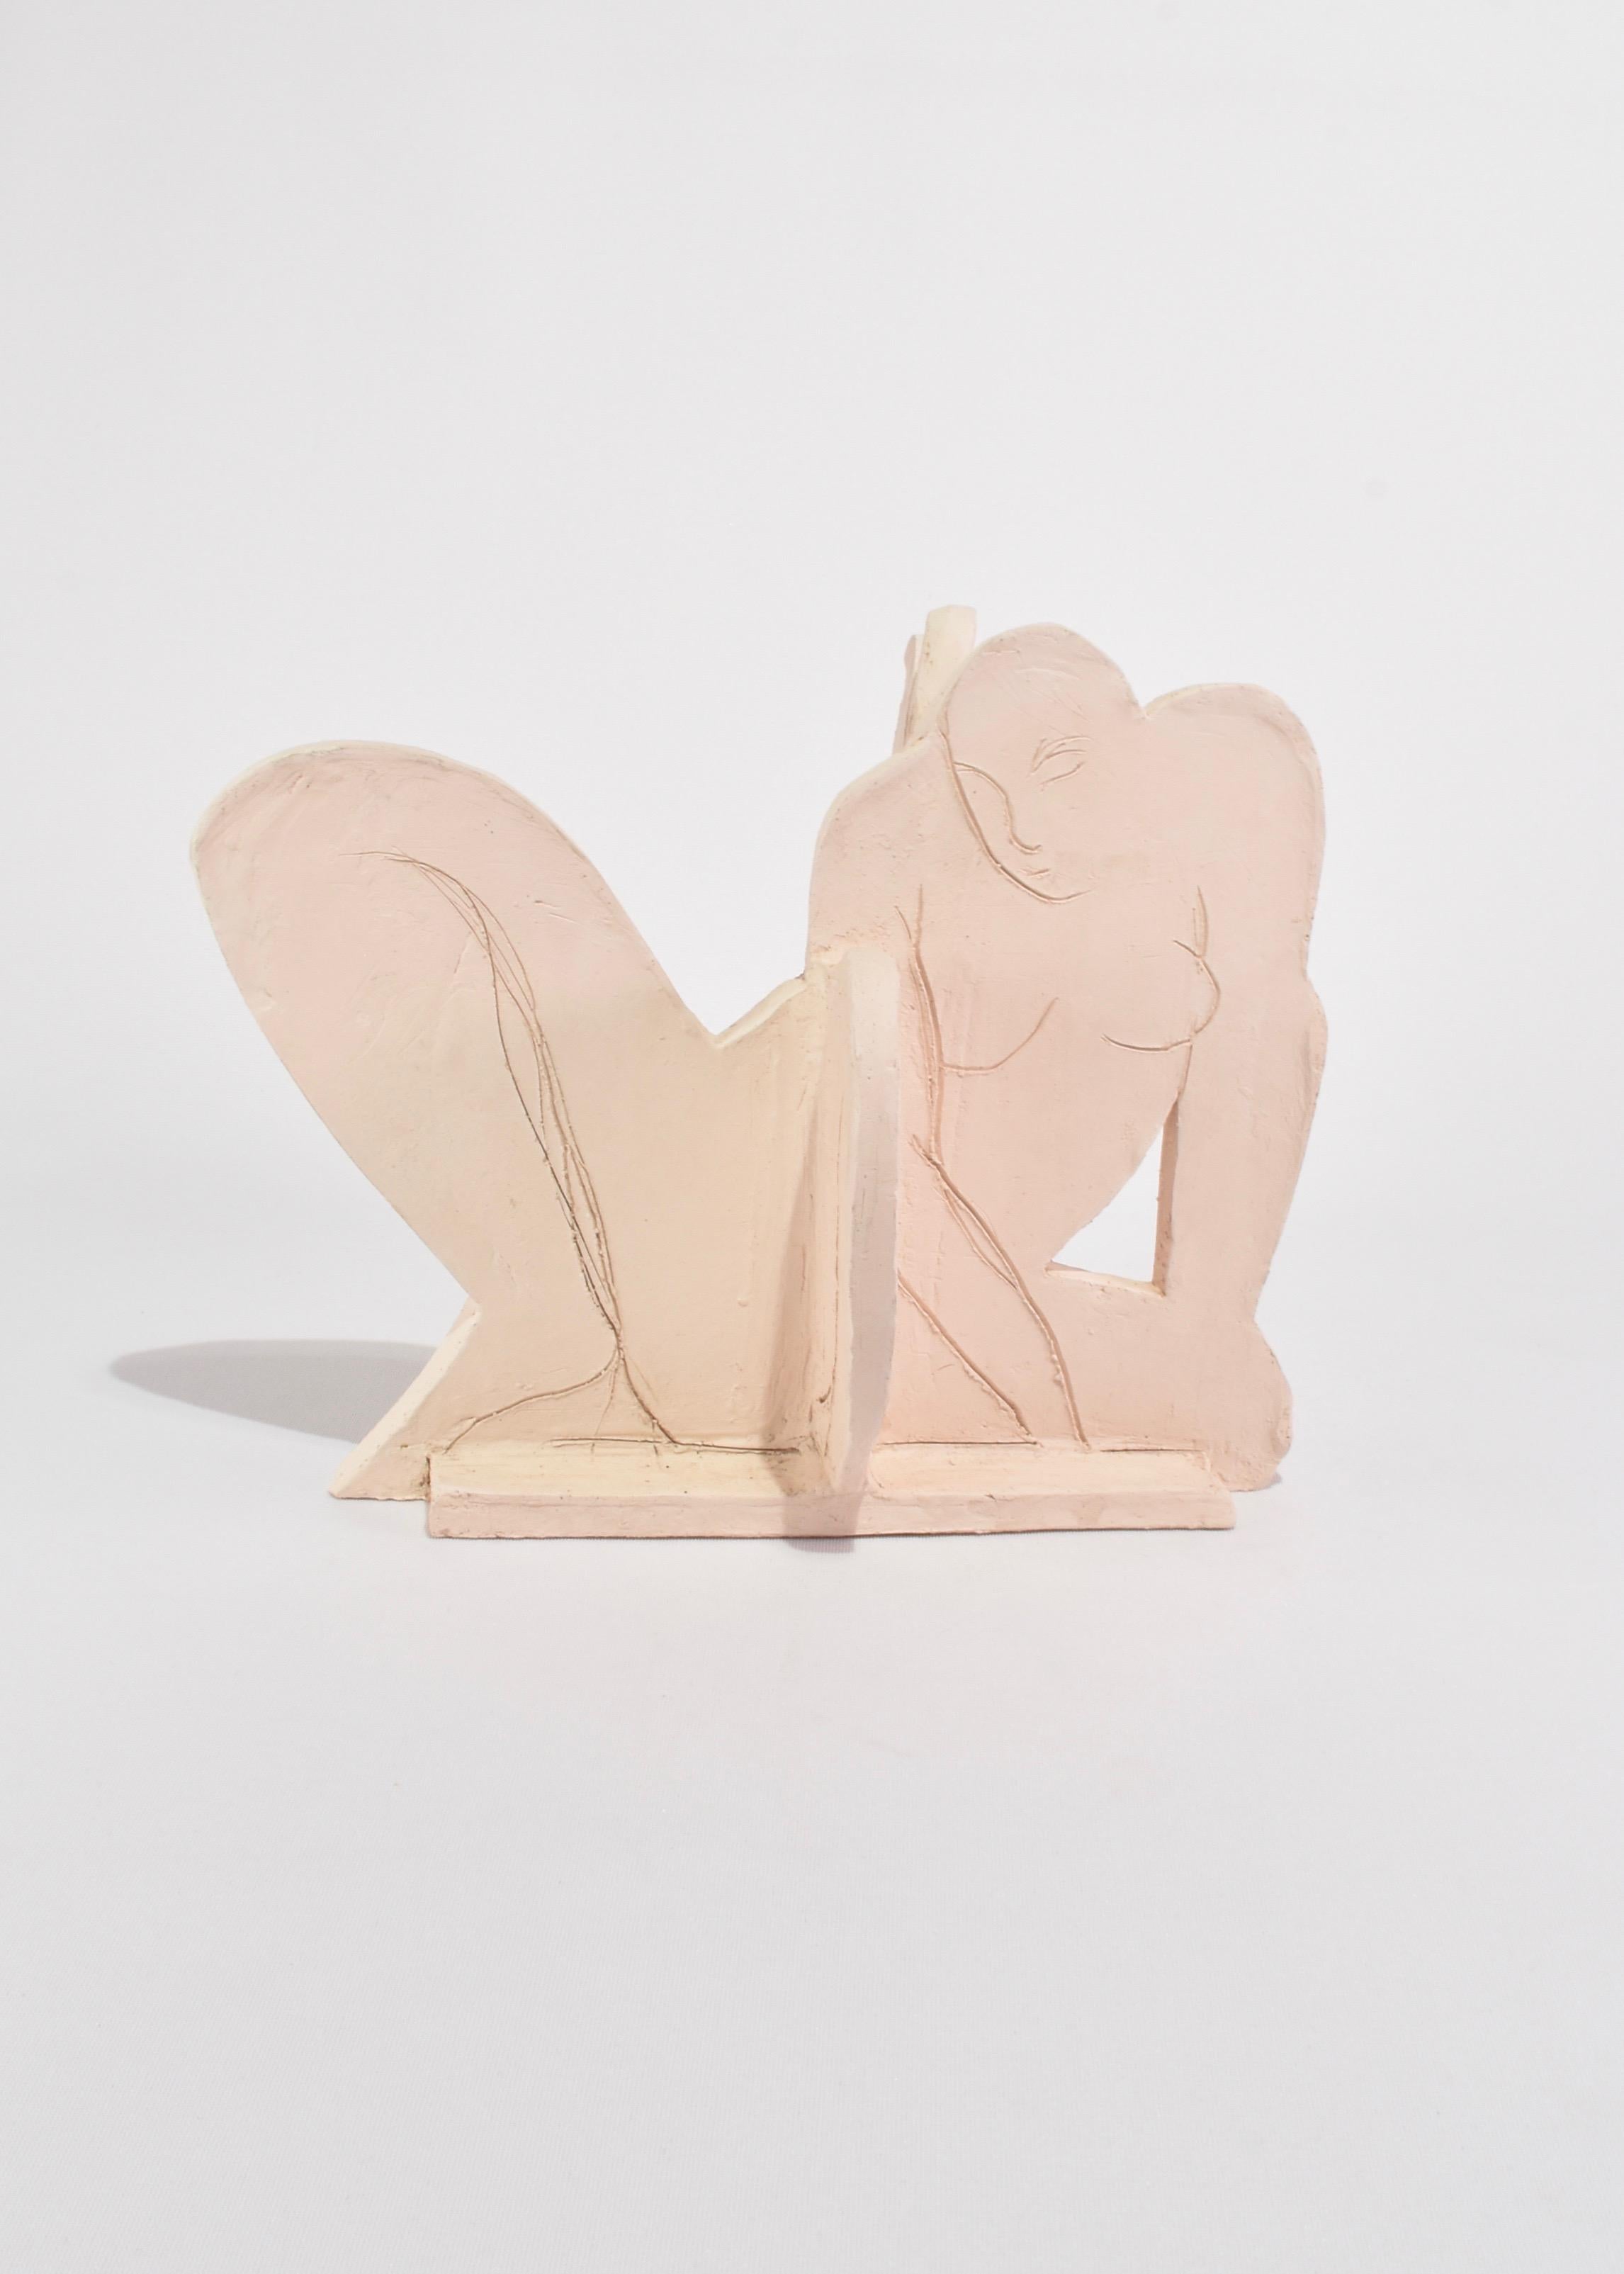 Hand-built ceramic figural sculpture with multiple dimensions. Unglazed, by Josephine Kress.